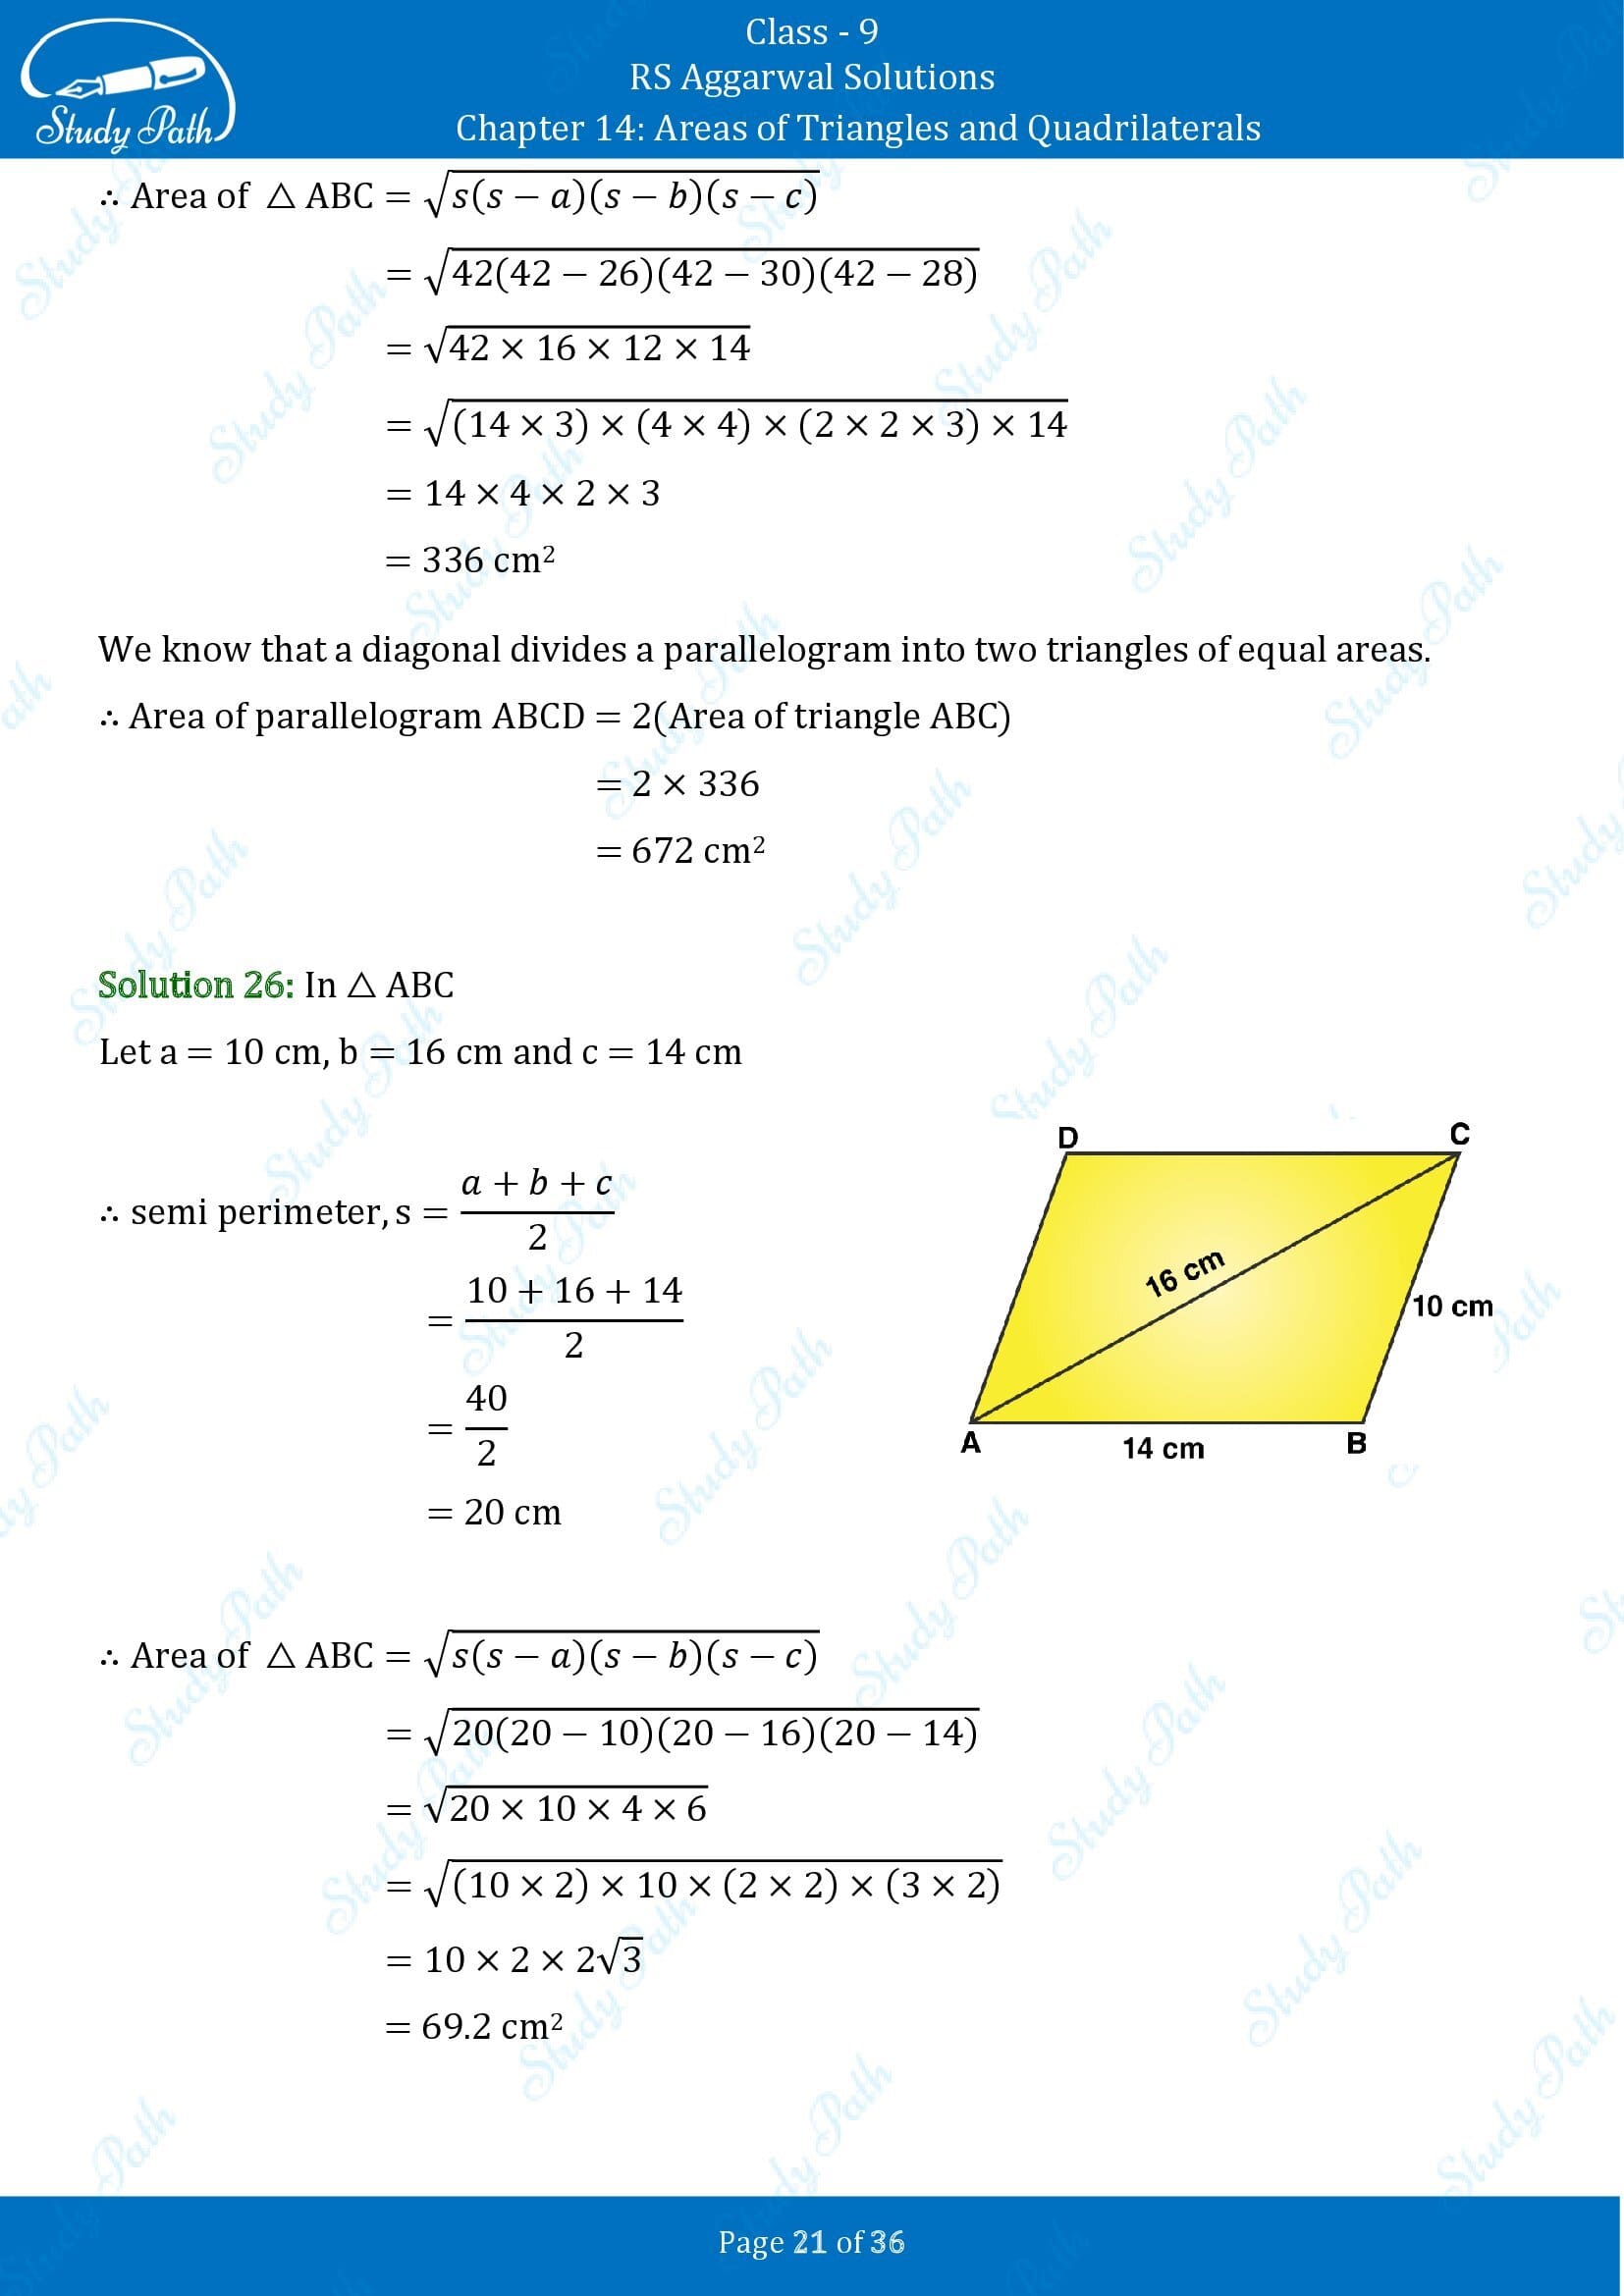 RS Aggarwal Solutions Class 9 Chapter 14 Areas of Triangles and Quadrilaterals Exercise 14 00021